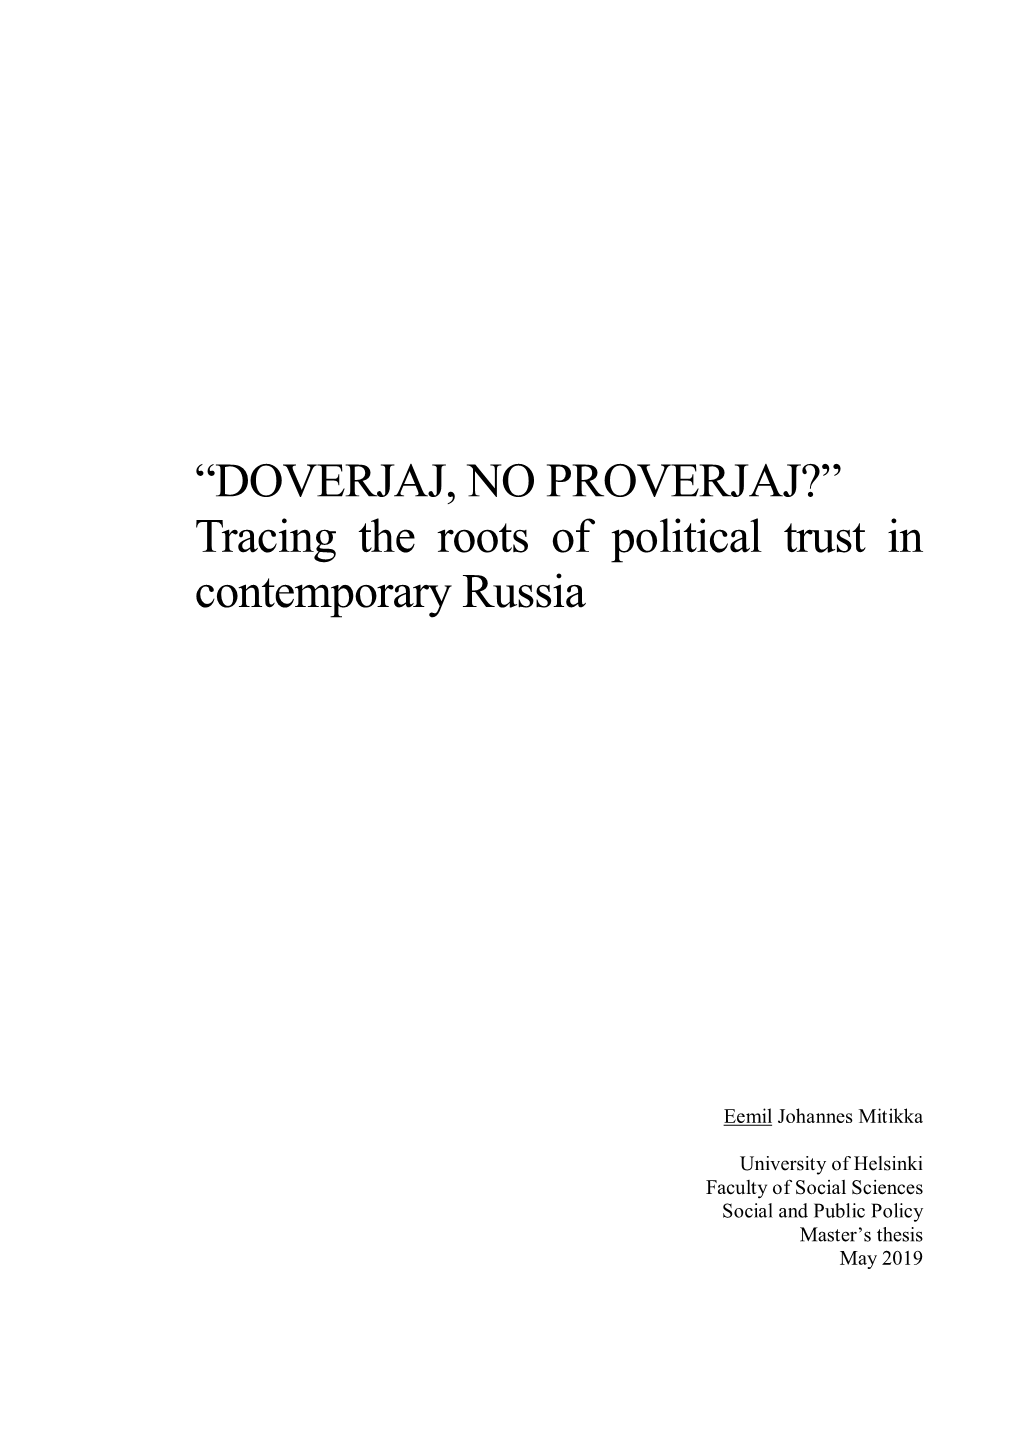 “DOVERJAJ, NO PROVERJAJ?” Tracing the Roots of Political Trust in Contemporary Russia